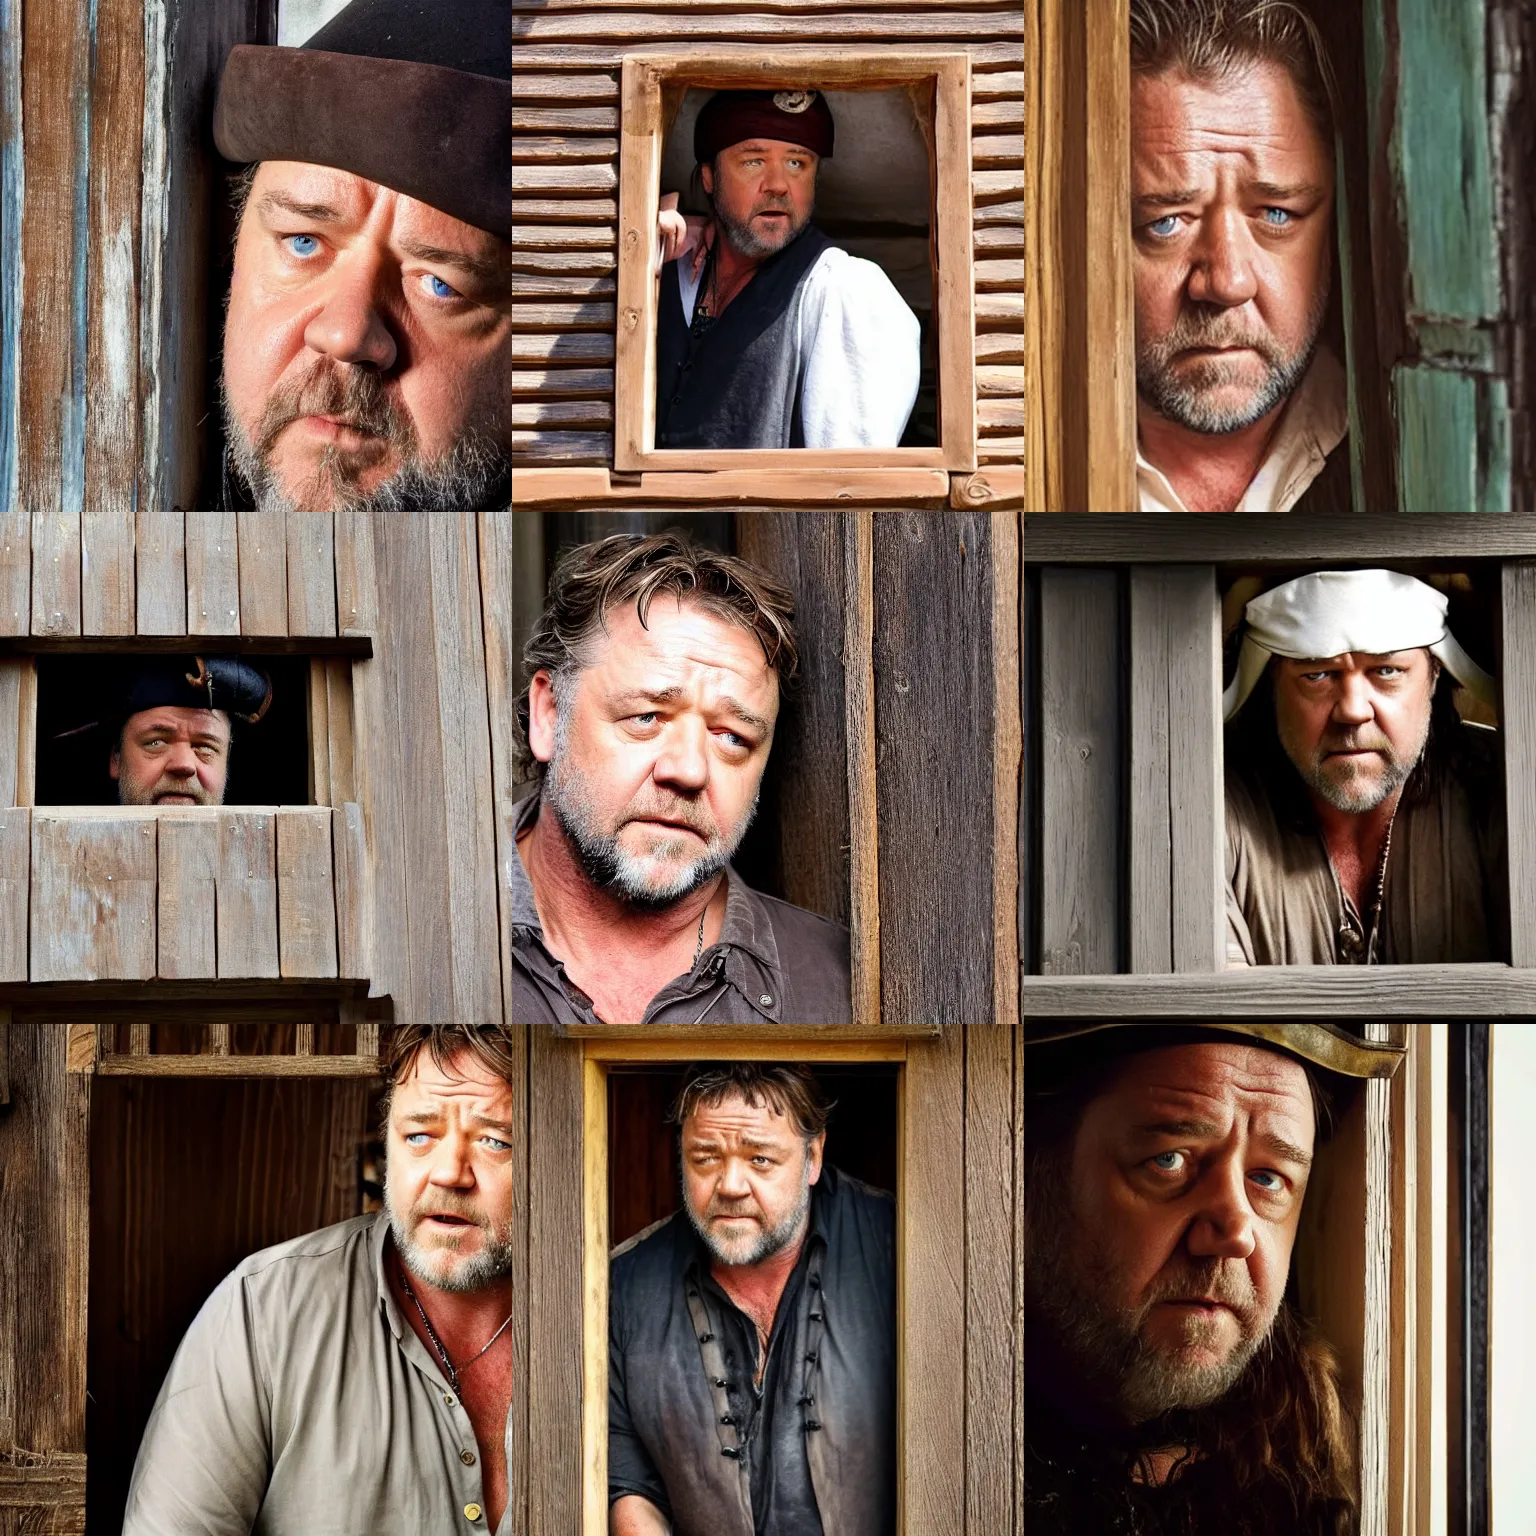 Prompt: russell crowe with large pirate hat peering out concerned down to camera from a small window in a wooden wall